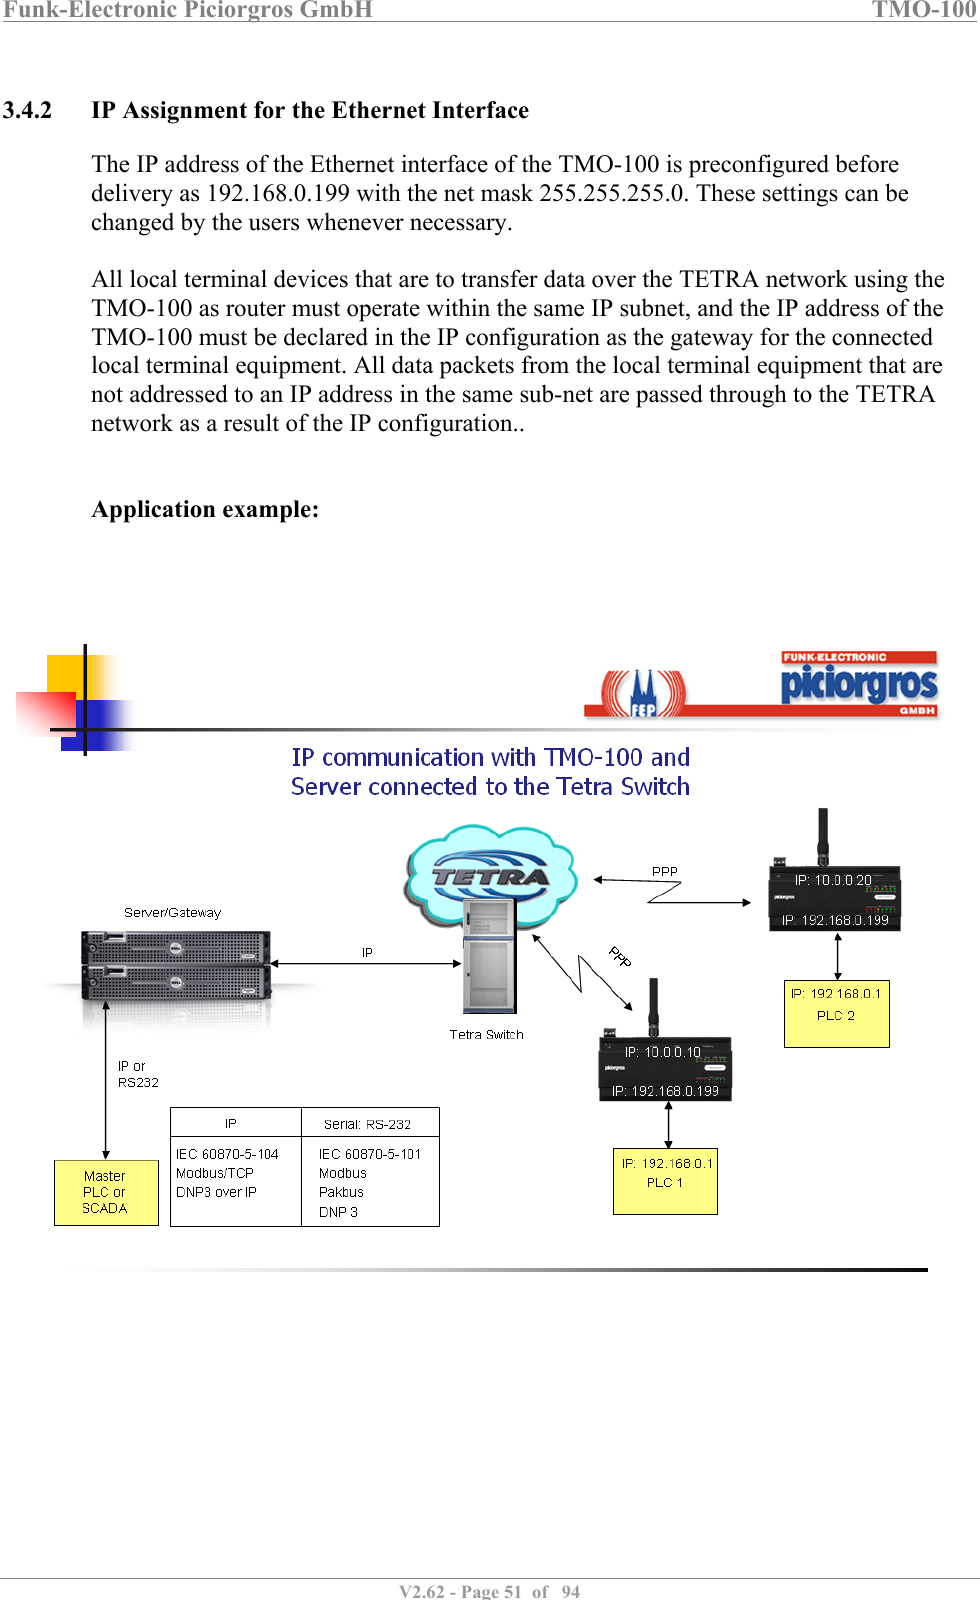 Funk-Electronic Piciorgros GmbH   TMO-100   V2.62 - Page 51  of   94   3.4.2 IP Assignment for the Ethernet Interface The IP address of the Ethernet interface of the TMO-100 is preconfigured before delivery as 192.168.0.199 with the net mask 255.255.255.0. These settings can be changed by the users whenever necessary.   All local terminal devices that are to transfer data over the TETRA network using the TMO-100 as router must operate within the same IP subnet, and the IP address of the TMO-100 must be declared in the IP configuration as the gateway for the connected local terminal equipment. All data packets from the local terminal equipment that are not addressed to an IP address in the same sub-net are passed through to the TETRA network as a result of the IP configuration..   Application example:      